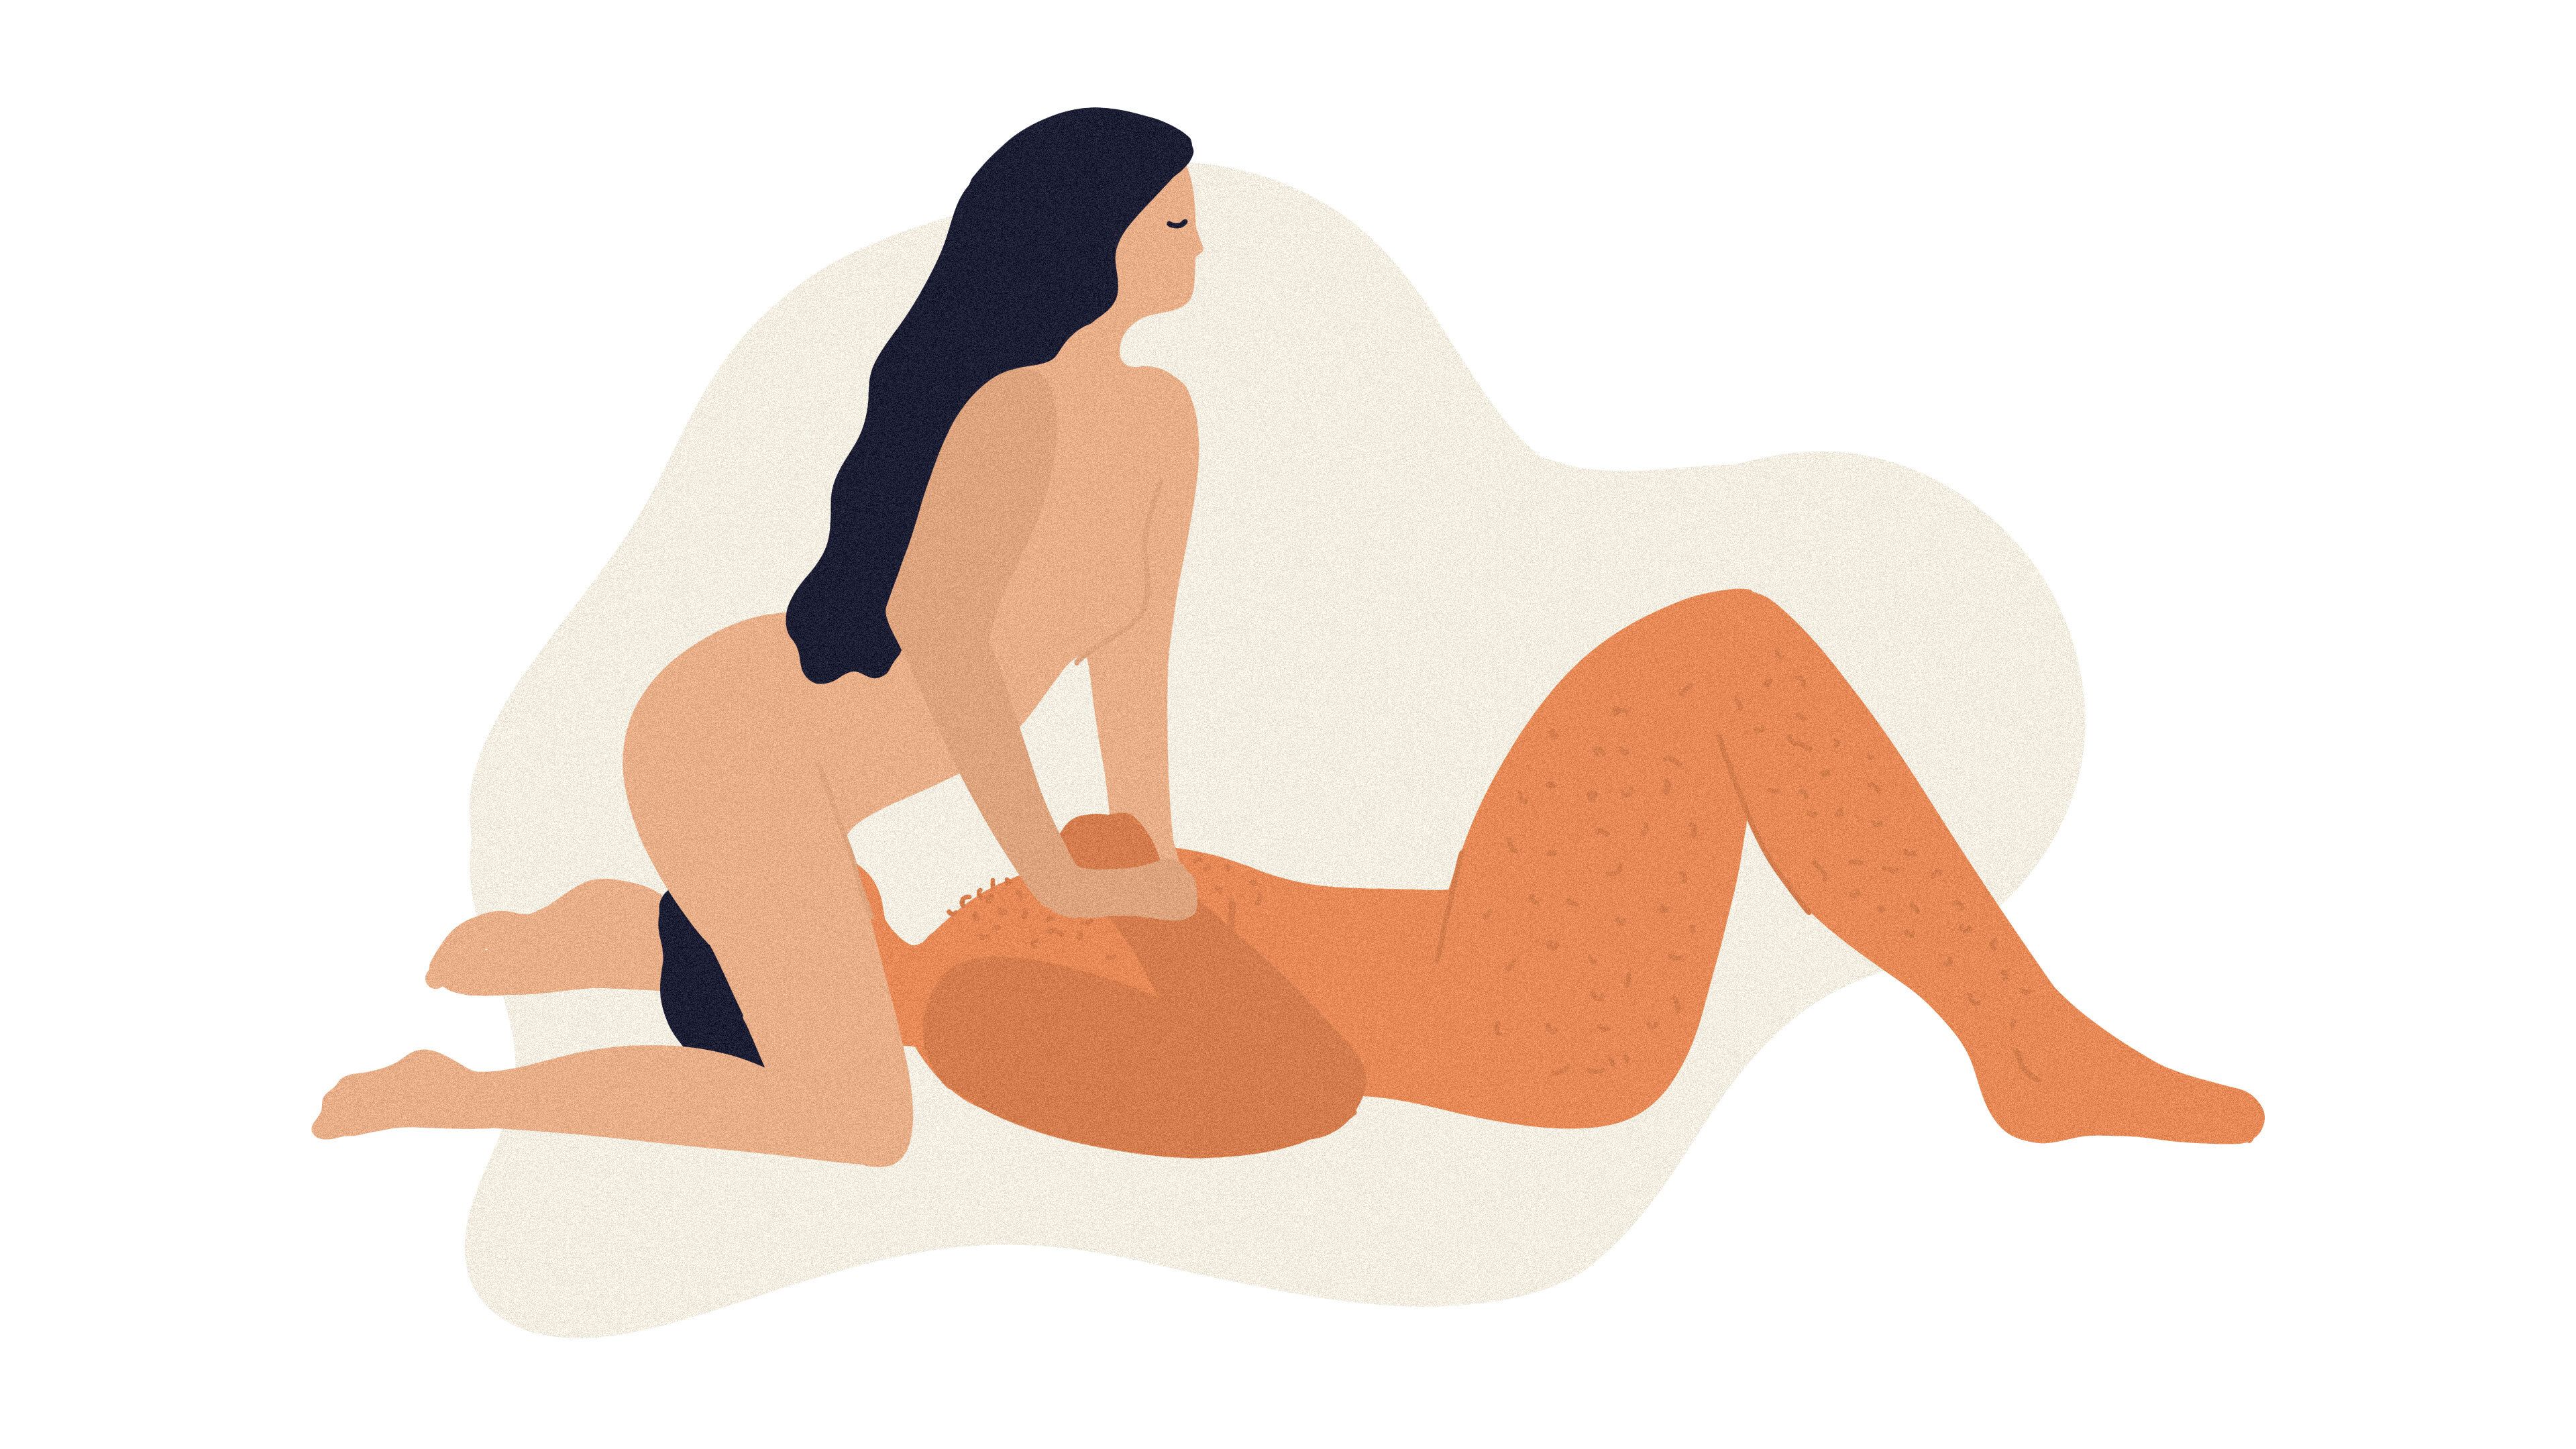 3840px x 2160px - The 5 Best Rim Job Positions for Eating Ass - Analingus Positions